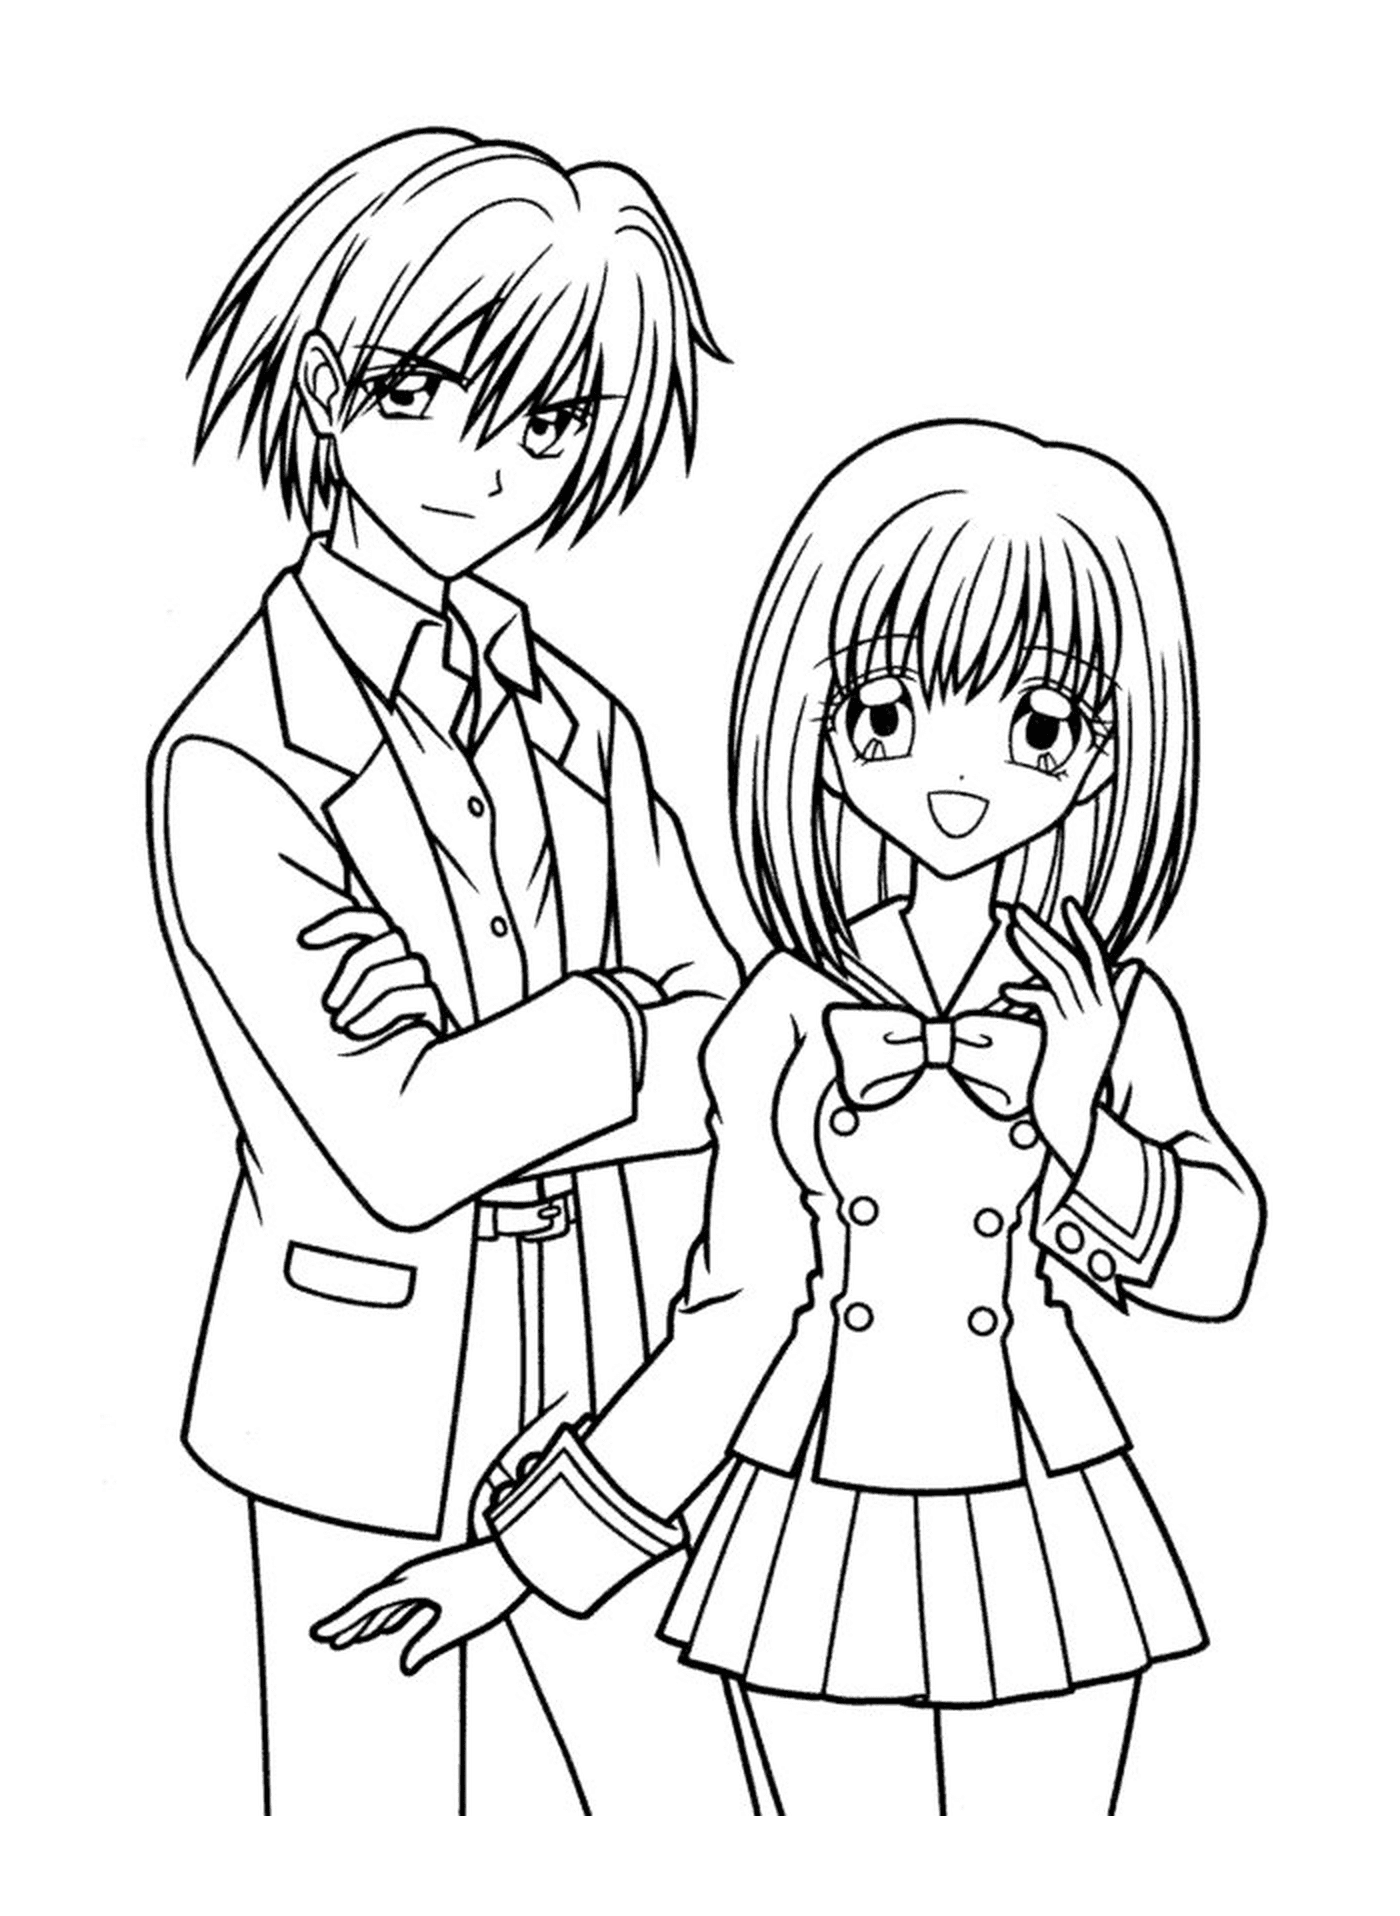  A girl and a boy pose for a photo 